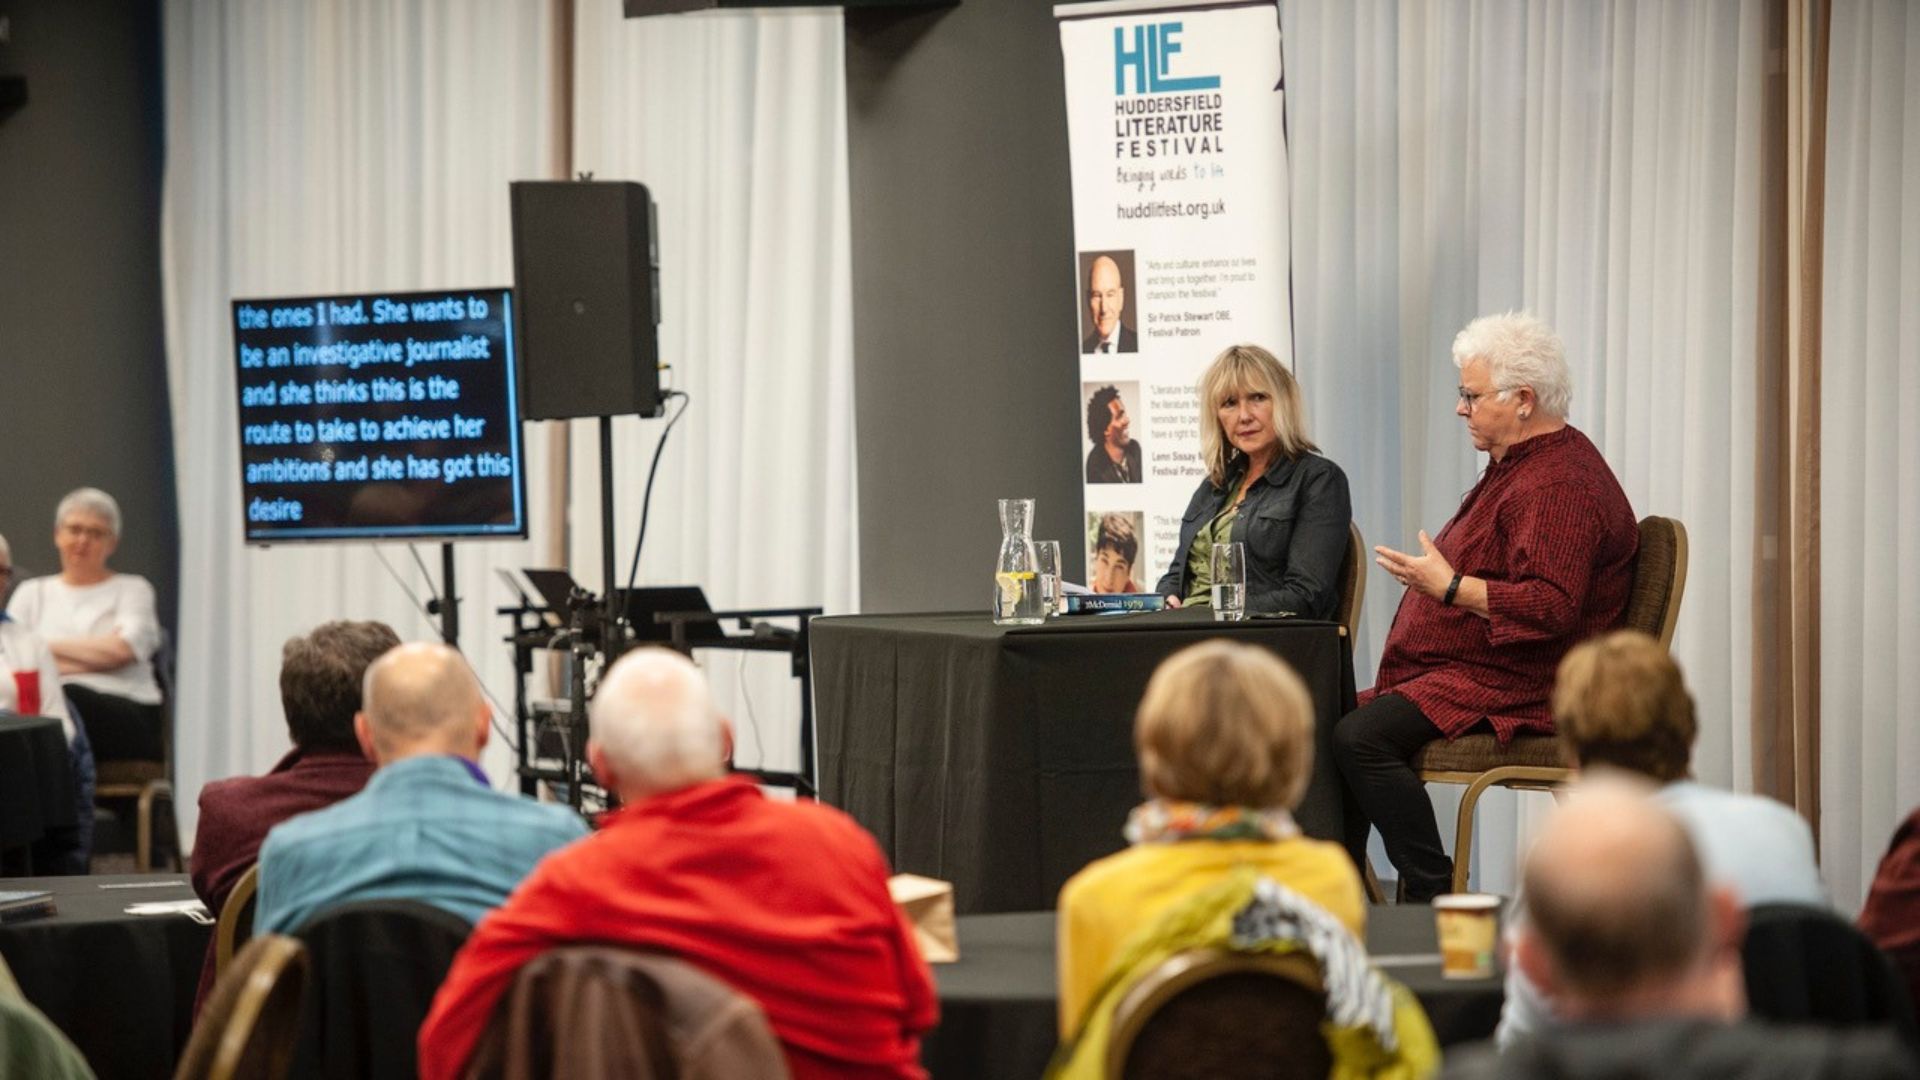 Val McDermid in conversation at Huddersfield Literature Festival 2021. The event had live subtitling